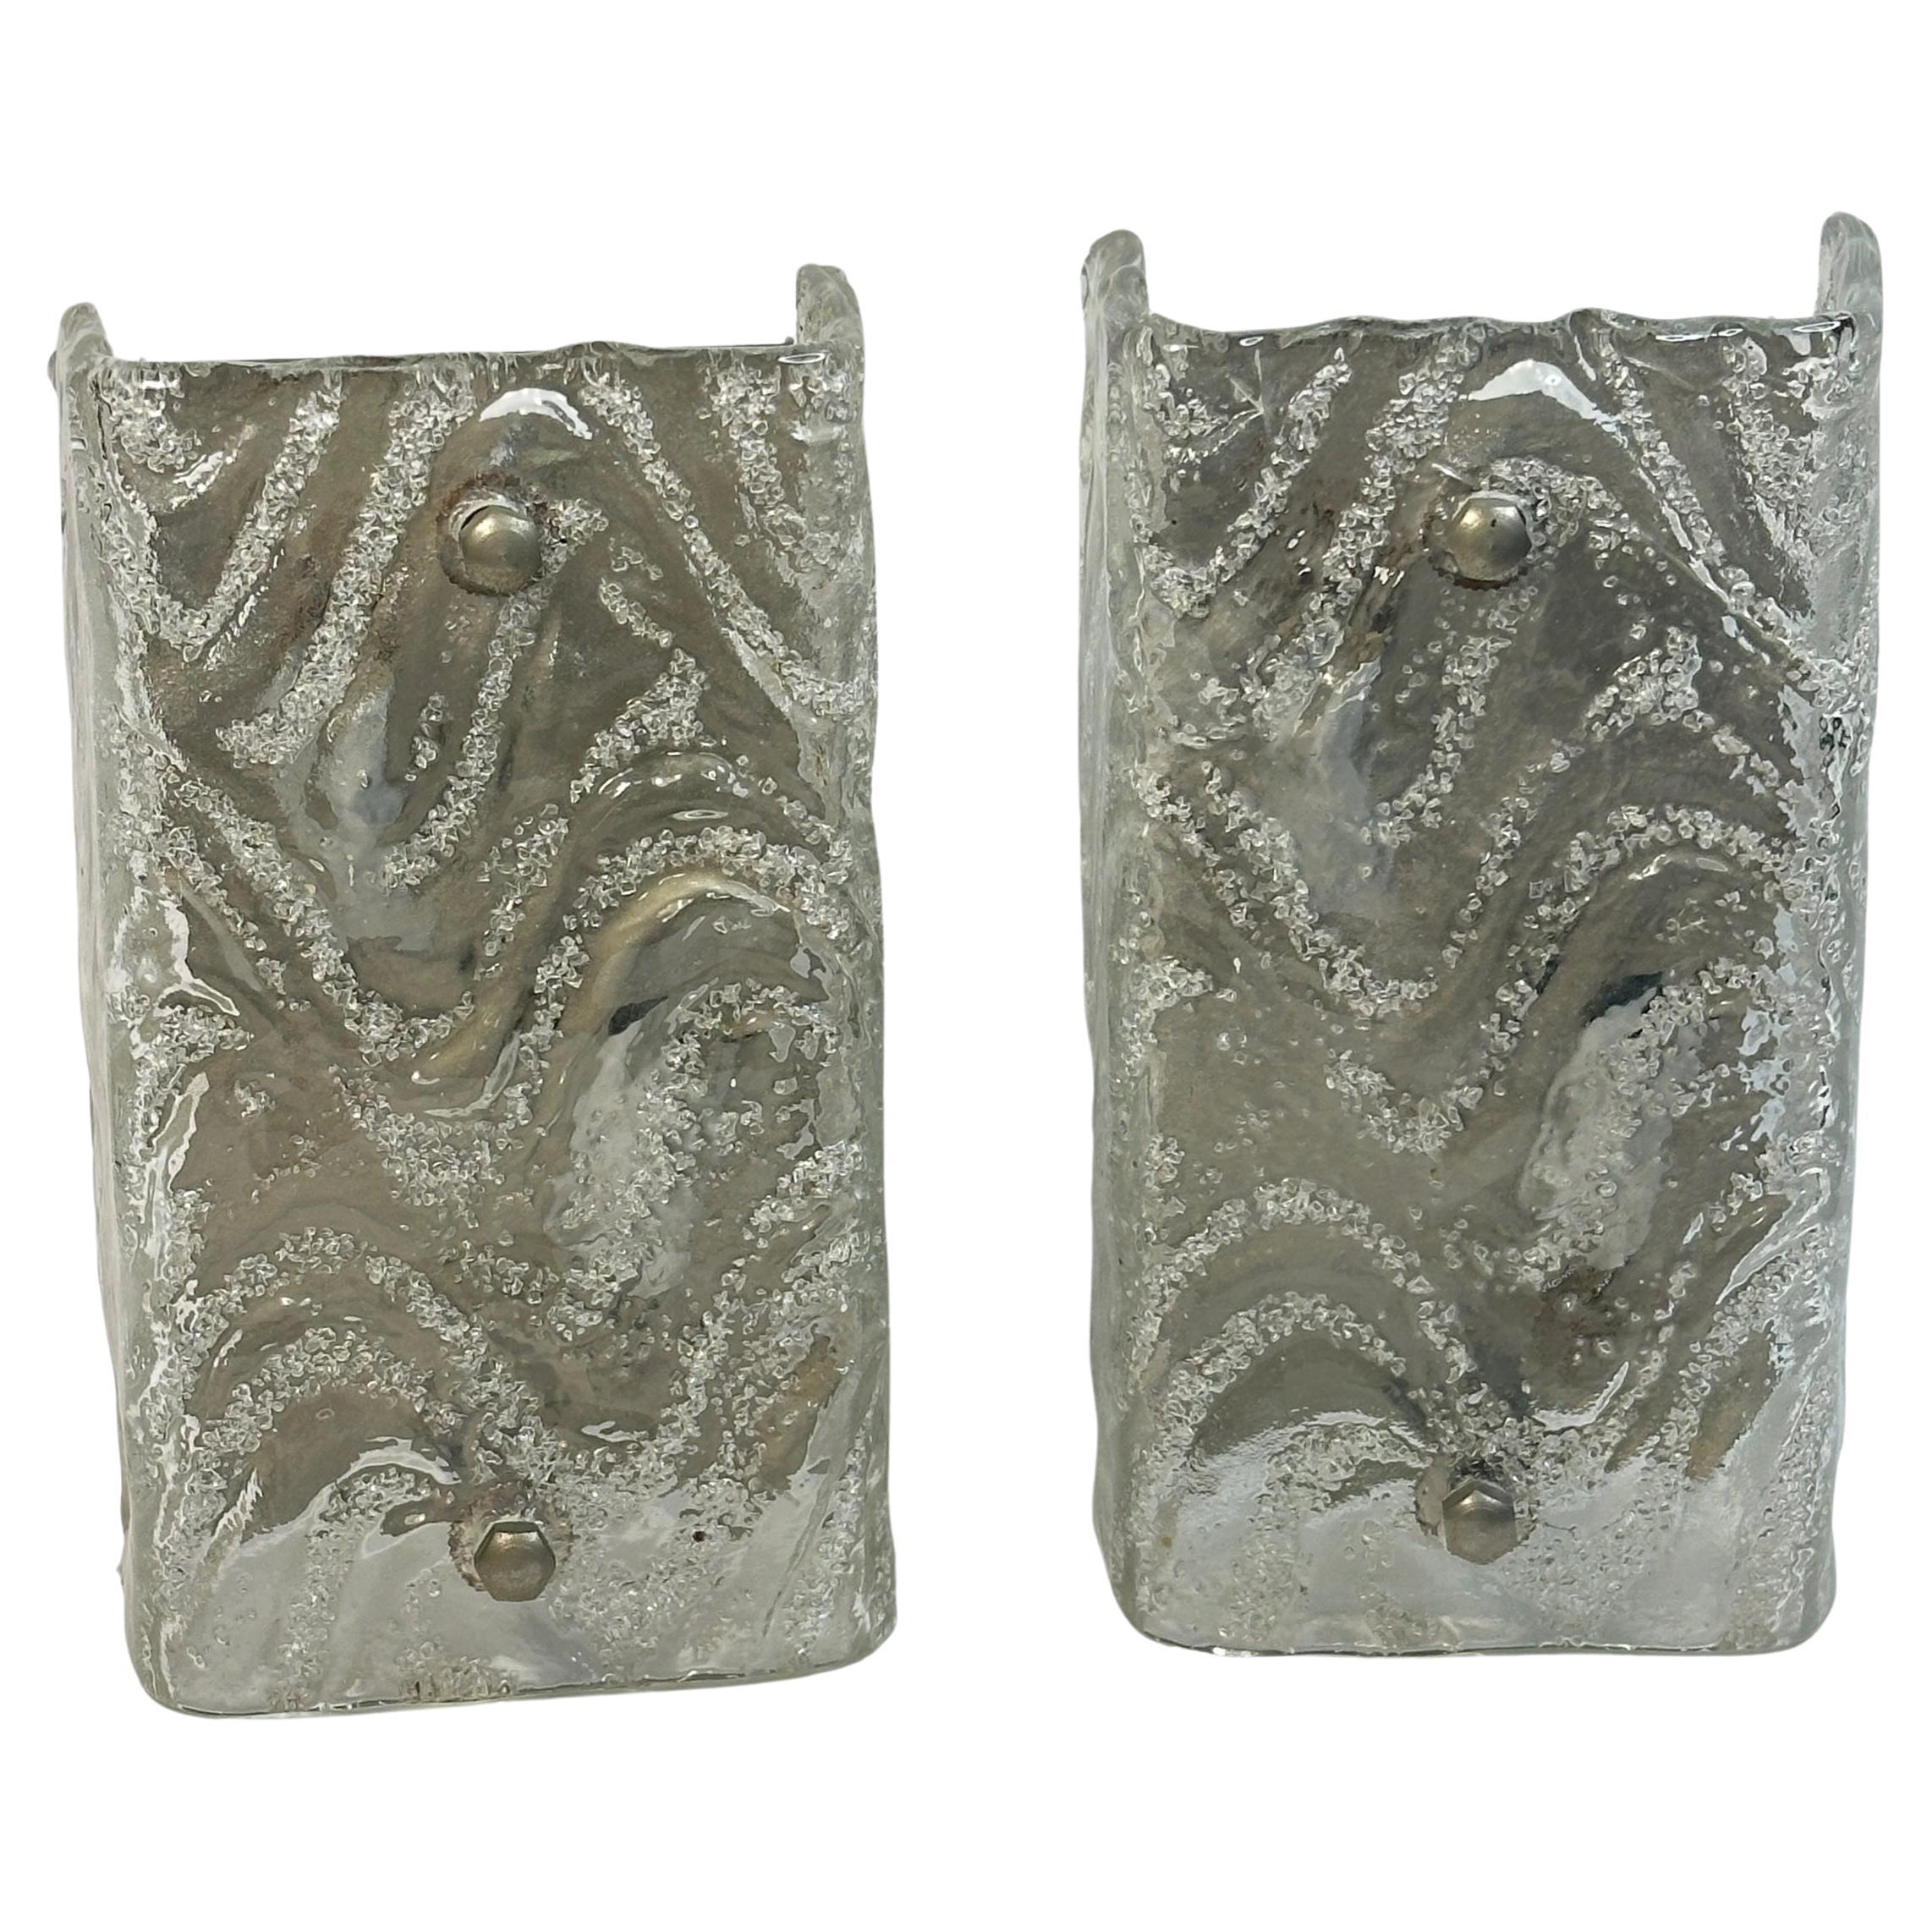 A stunning pair of Murano glass ice block wall sconces. Each consisting of a stylish single ice block design. A single nickel plated wall plate with two sockets on each plate and mount make for a beautiful wall light. Easy to mount and fantastic to